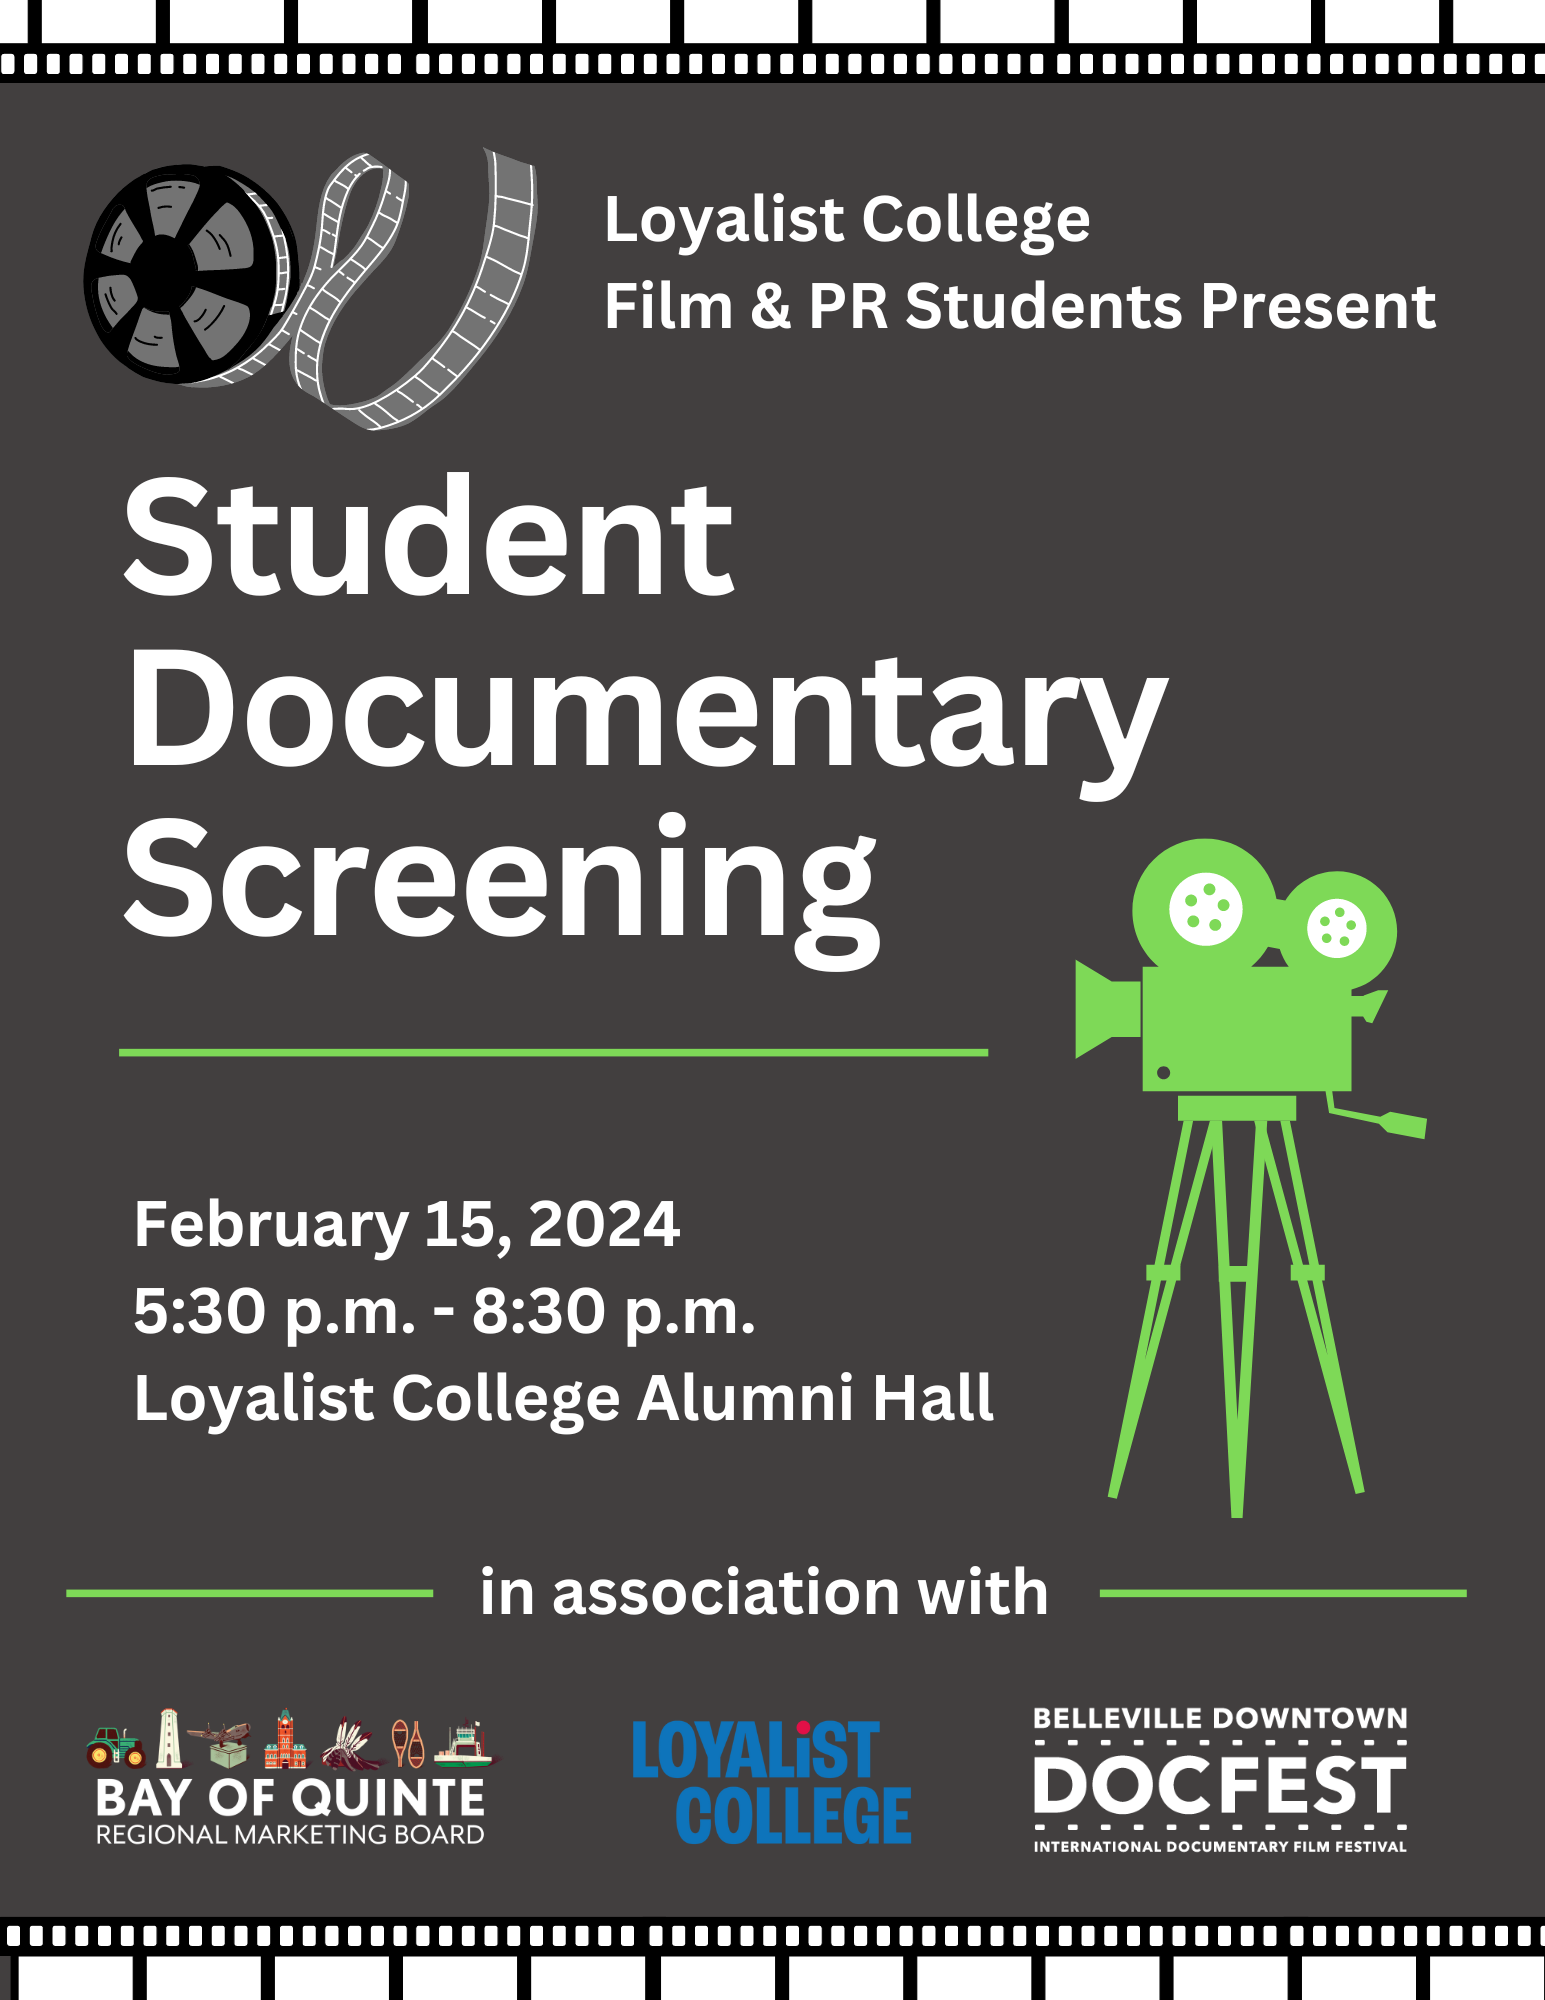 Event poster titled "Student Documentary Screening". Has animated images of camera and film